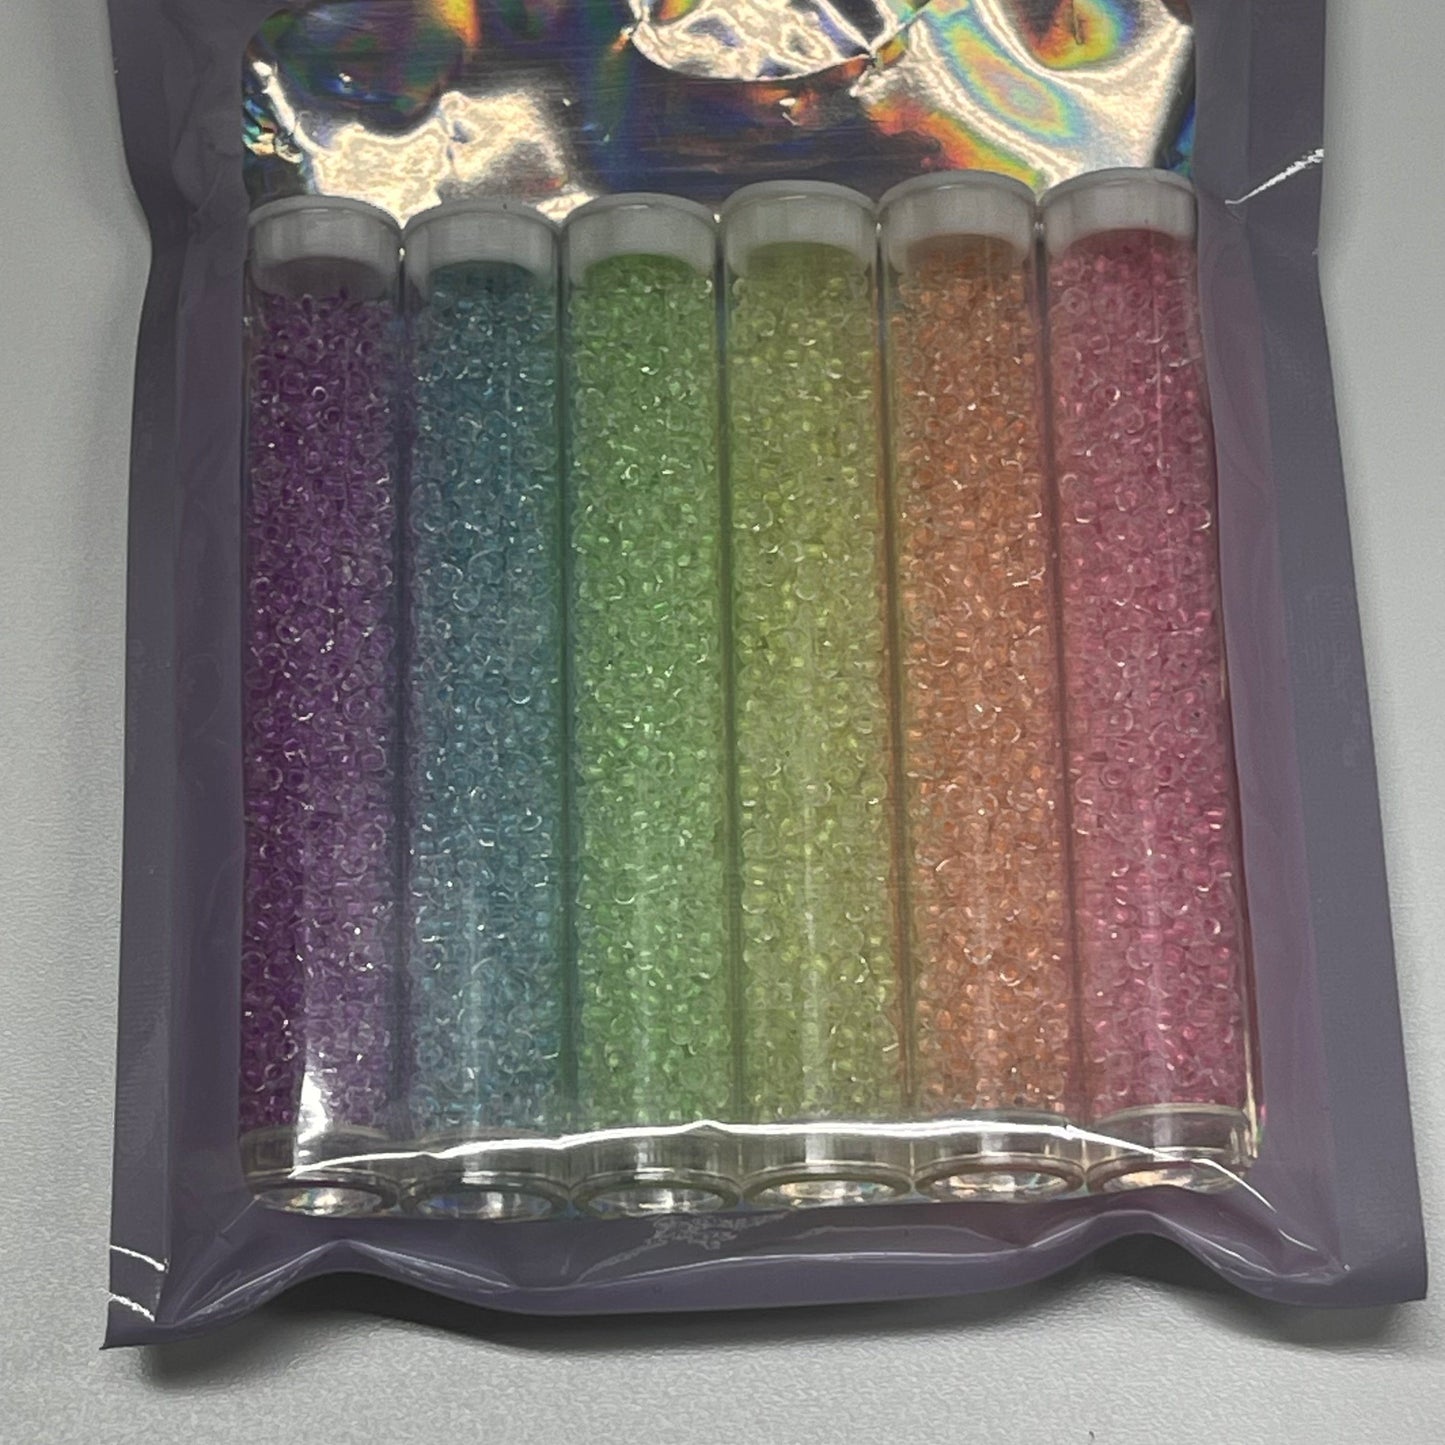 NEON GLOW IN DARK SET, 11/0 Seedbeads in 10G x 6 colours, BLACK FRIDAY PROMO Promotions